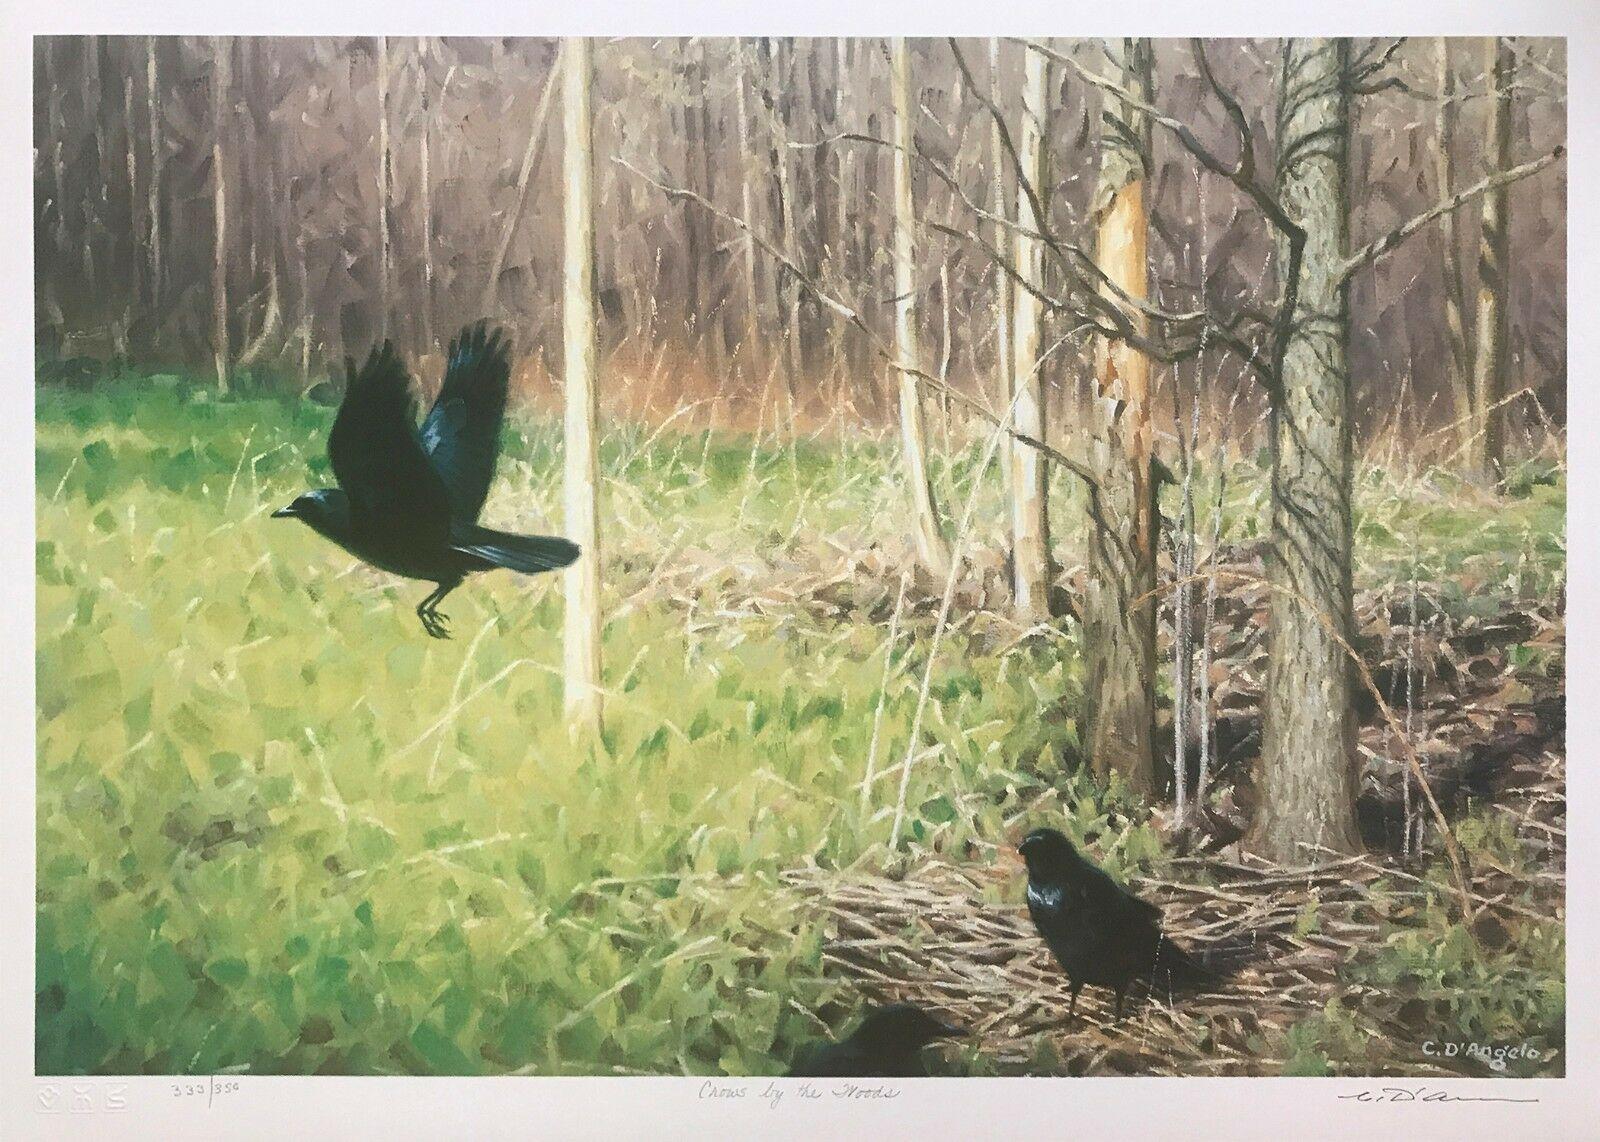 Claudio D'Angelo Animal Print - CROWS BY THE WOODS